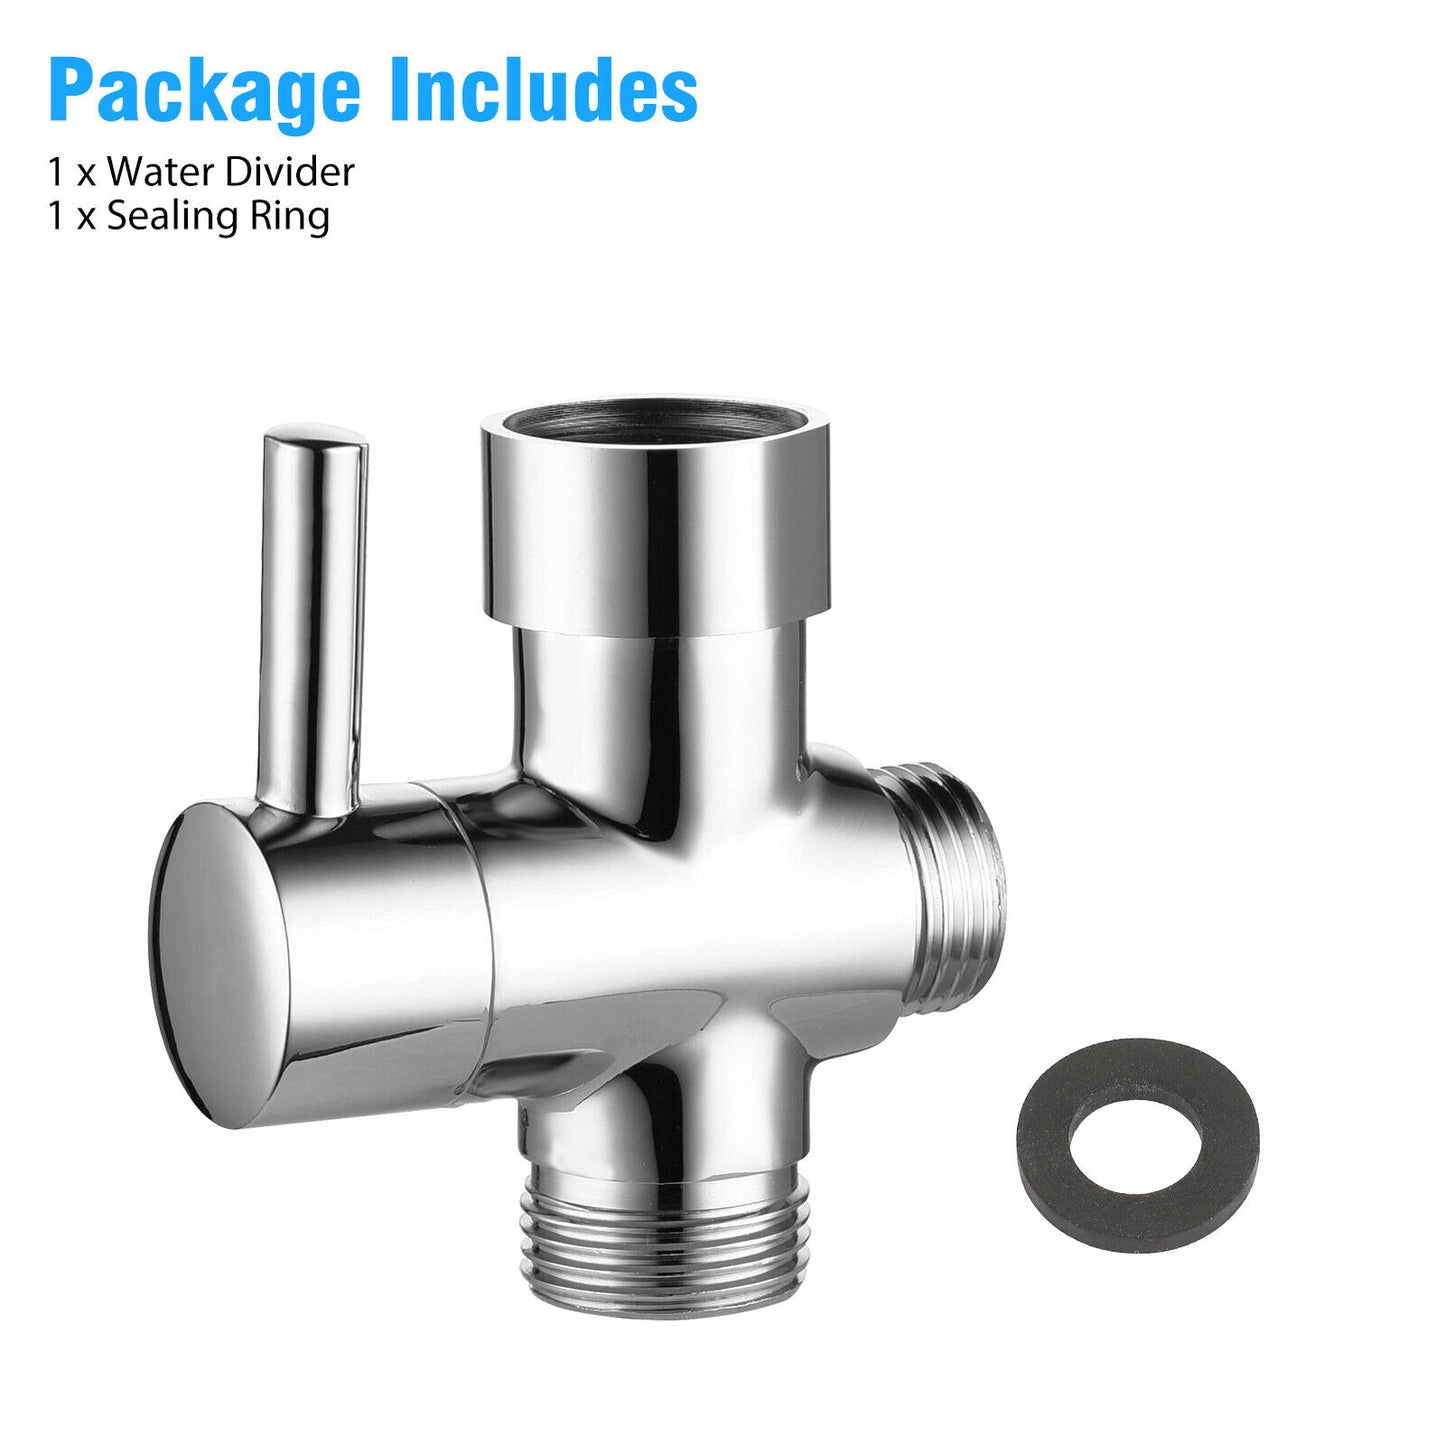 1/2" T-Adapter 3-Way Diverter Valve for Shower Head Bath Tap Switch Outlet Brass